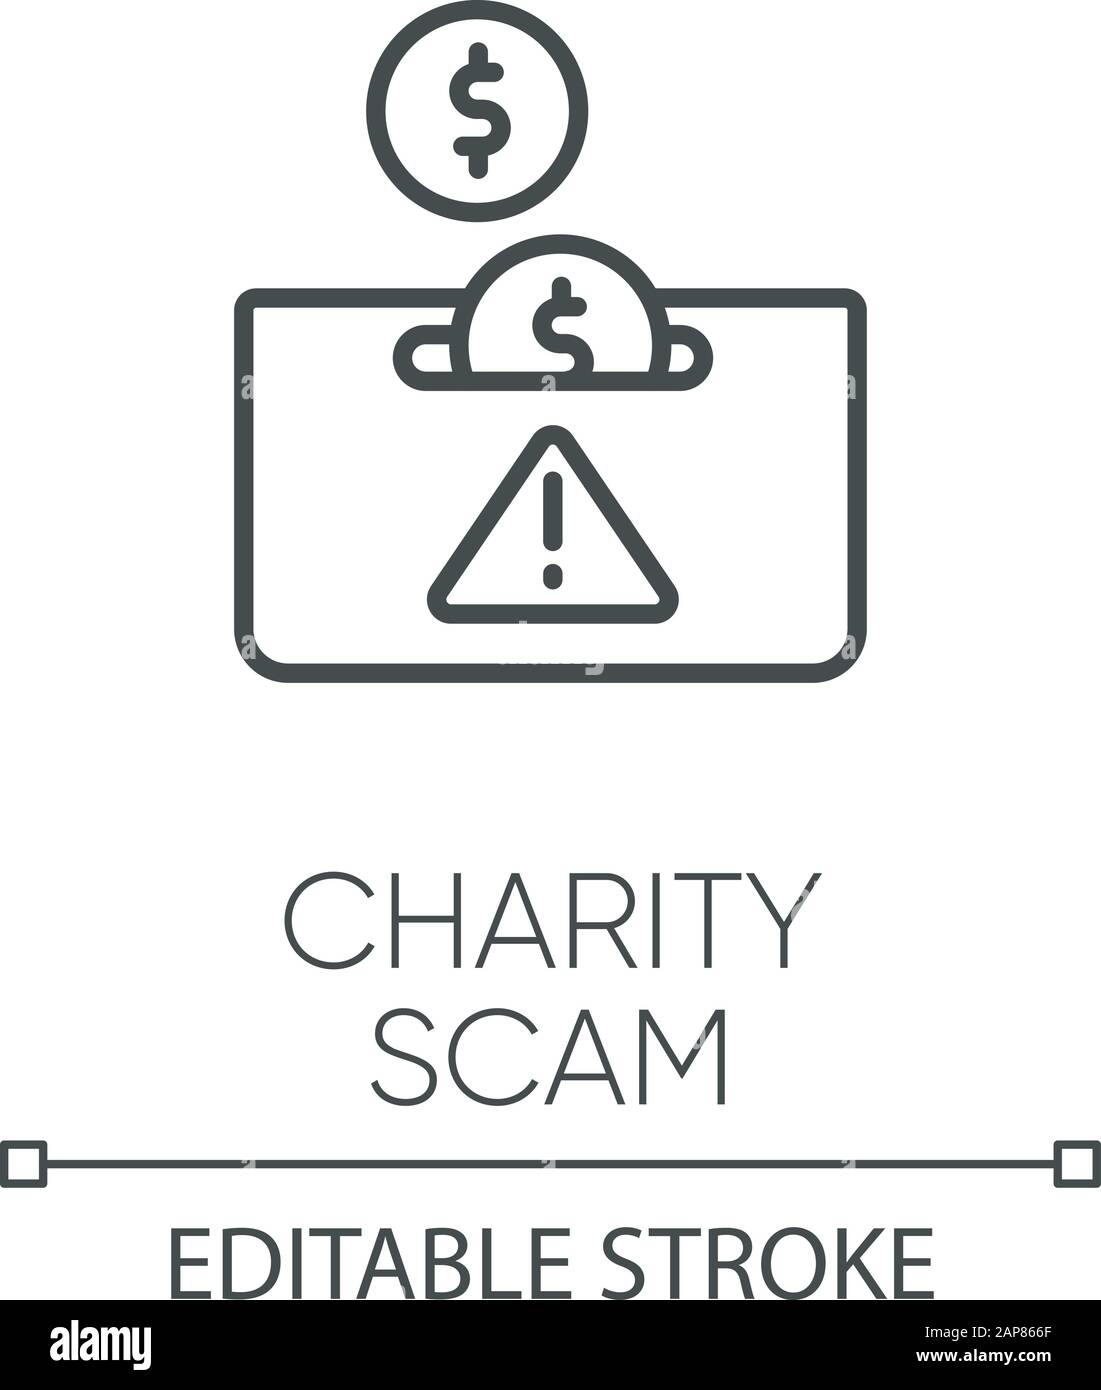 Charity scam linear icon. Sham charity. Fake donation request. False fundraiser. Money theft. Cybercrime. Thin line illustration. Contour symbol. Vect Stock Vector